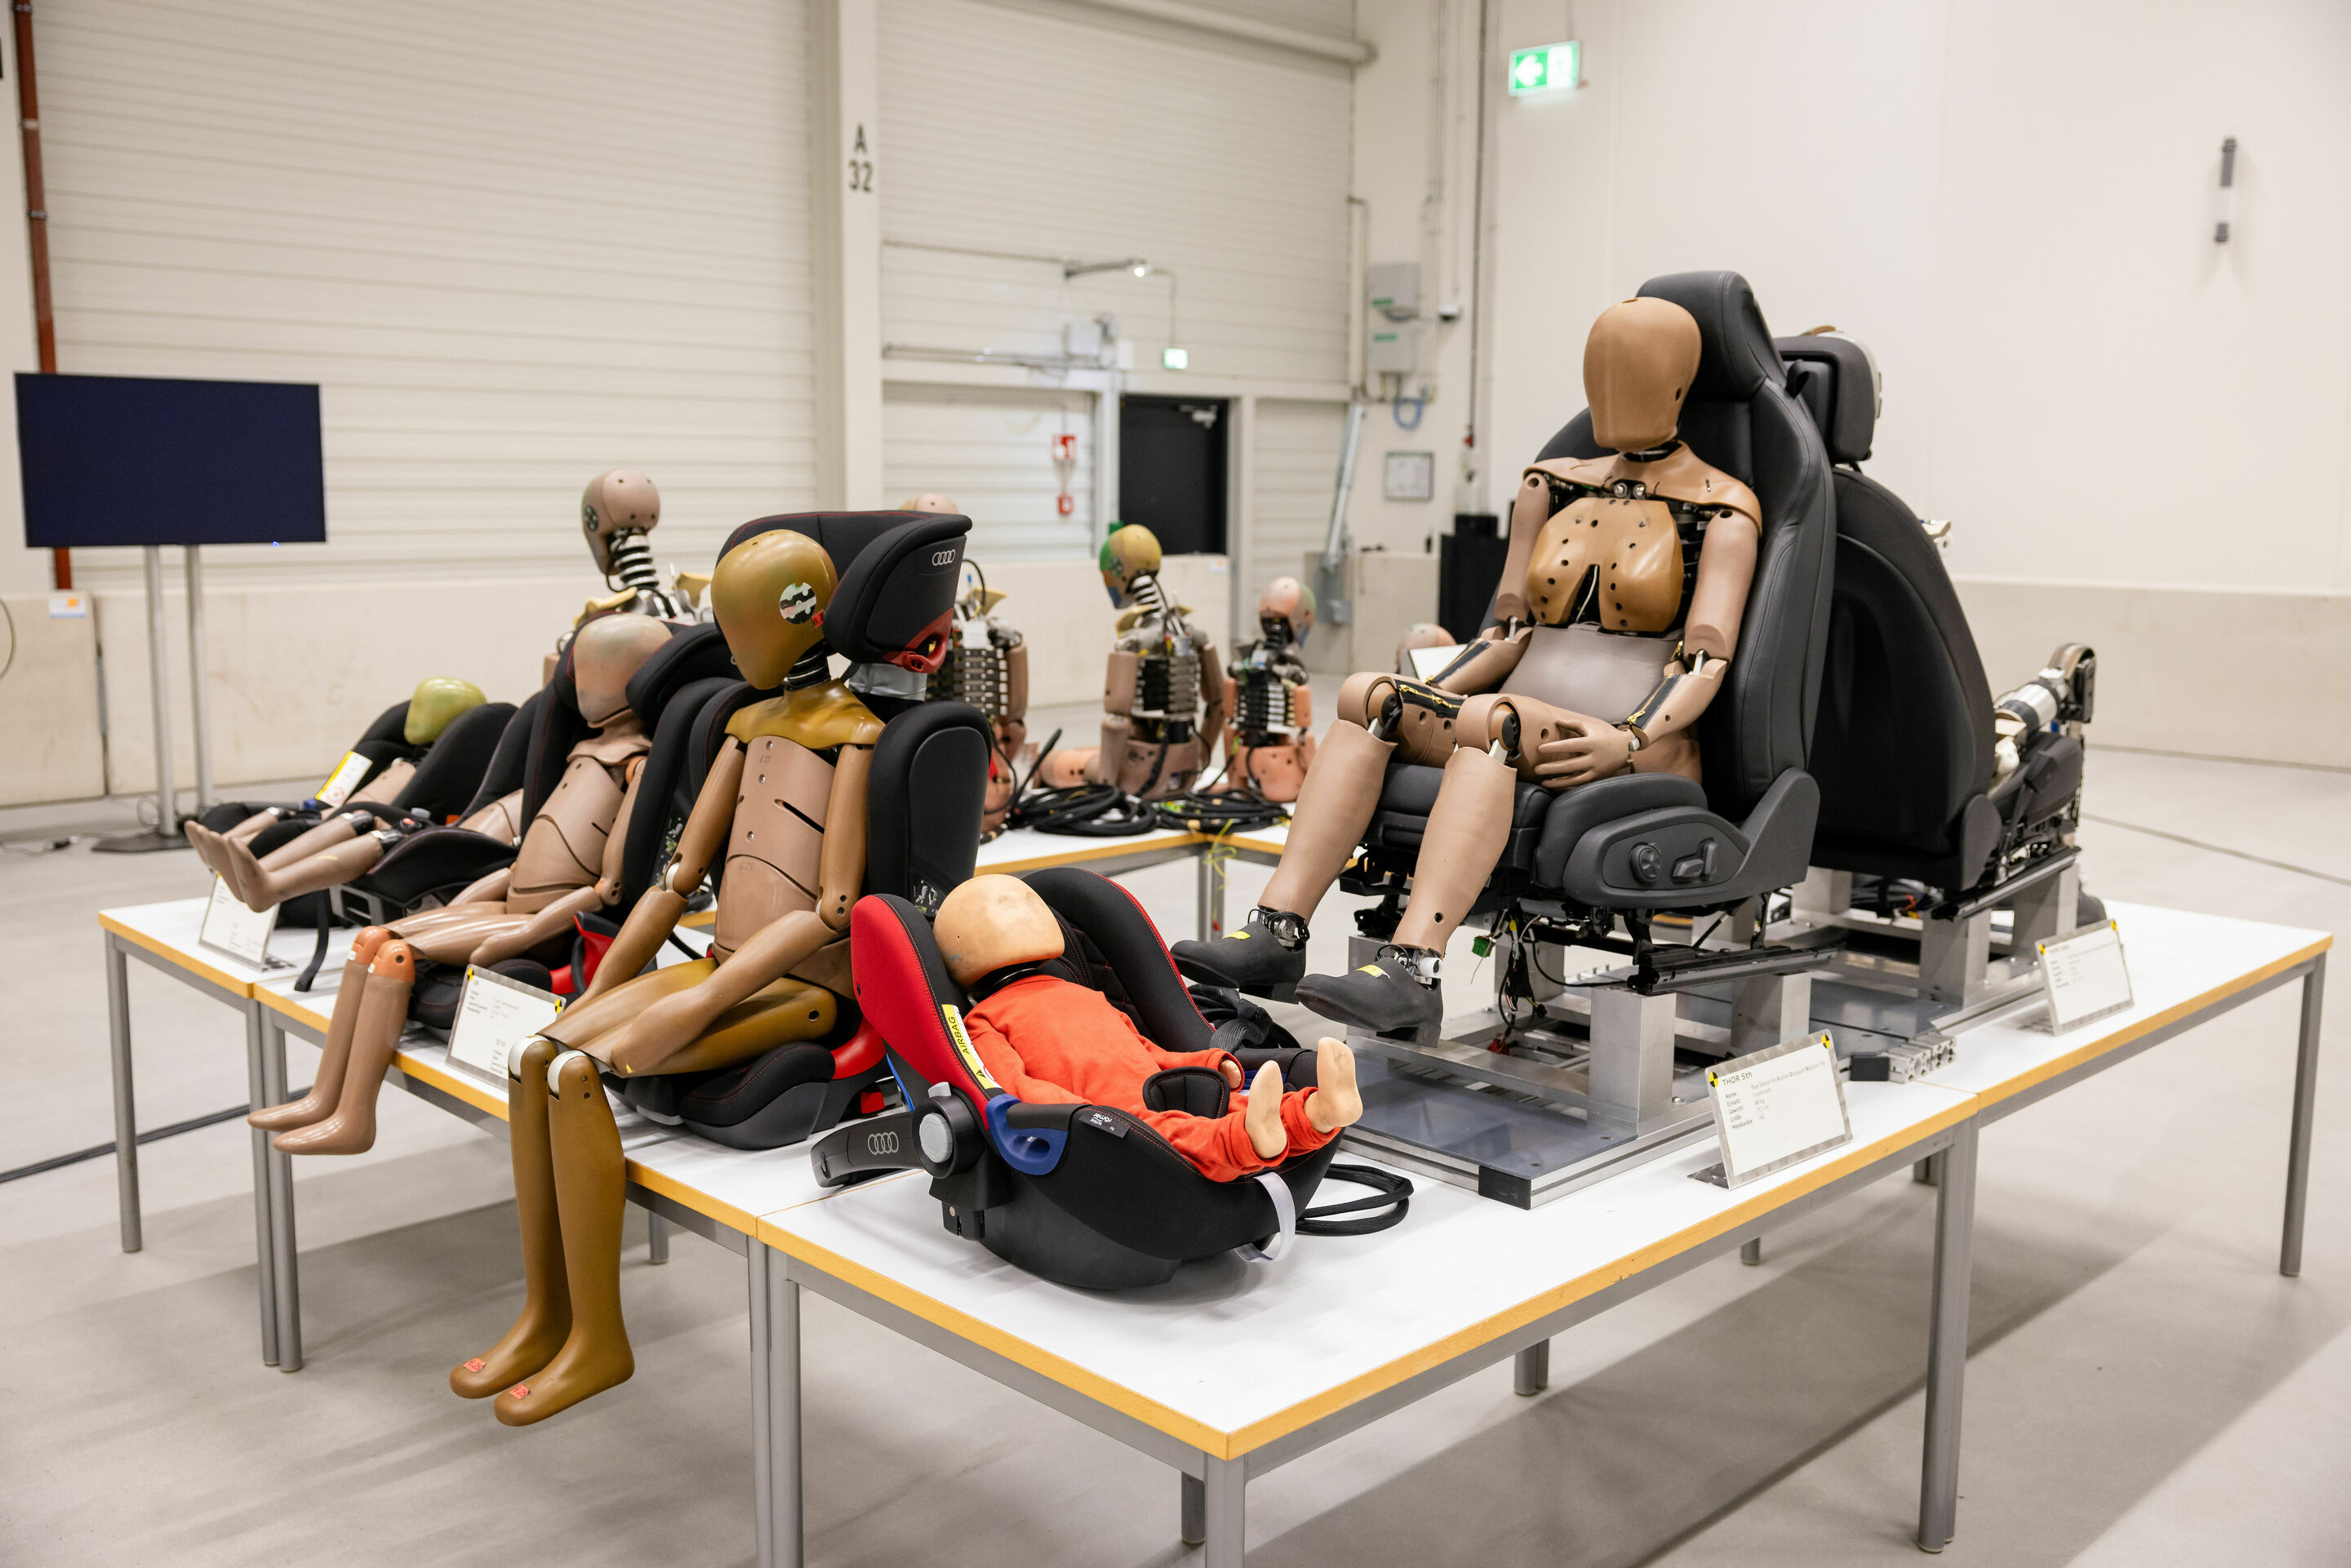 Audi opens new vehicle safety center